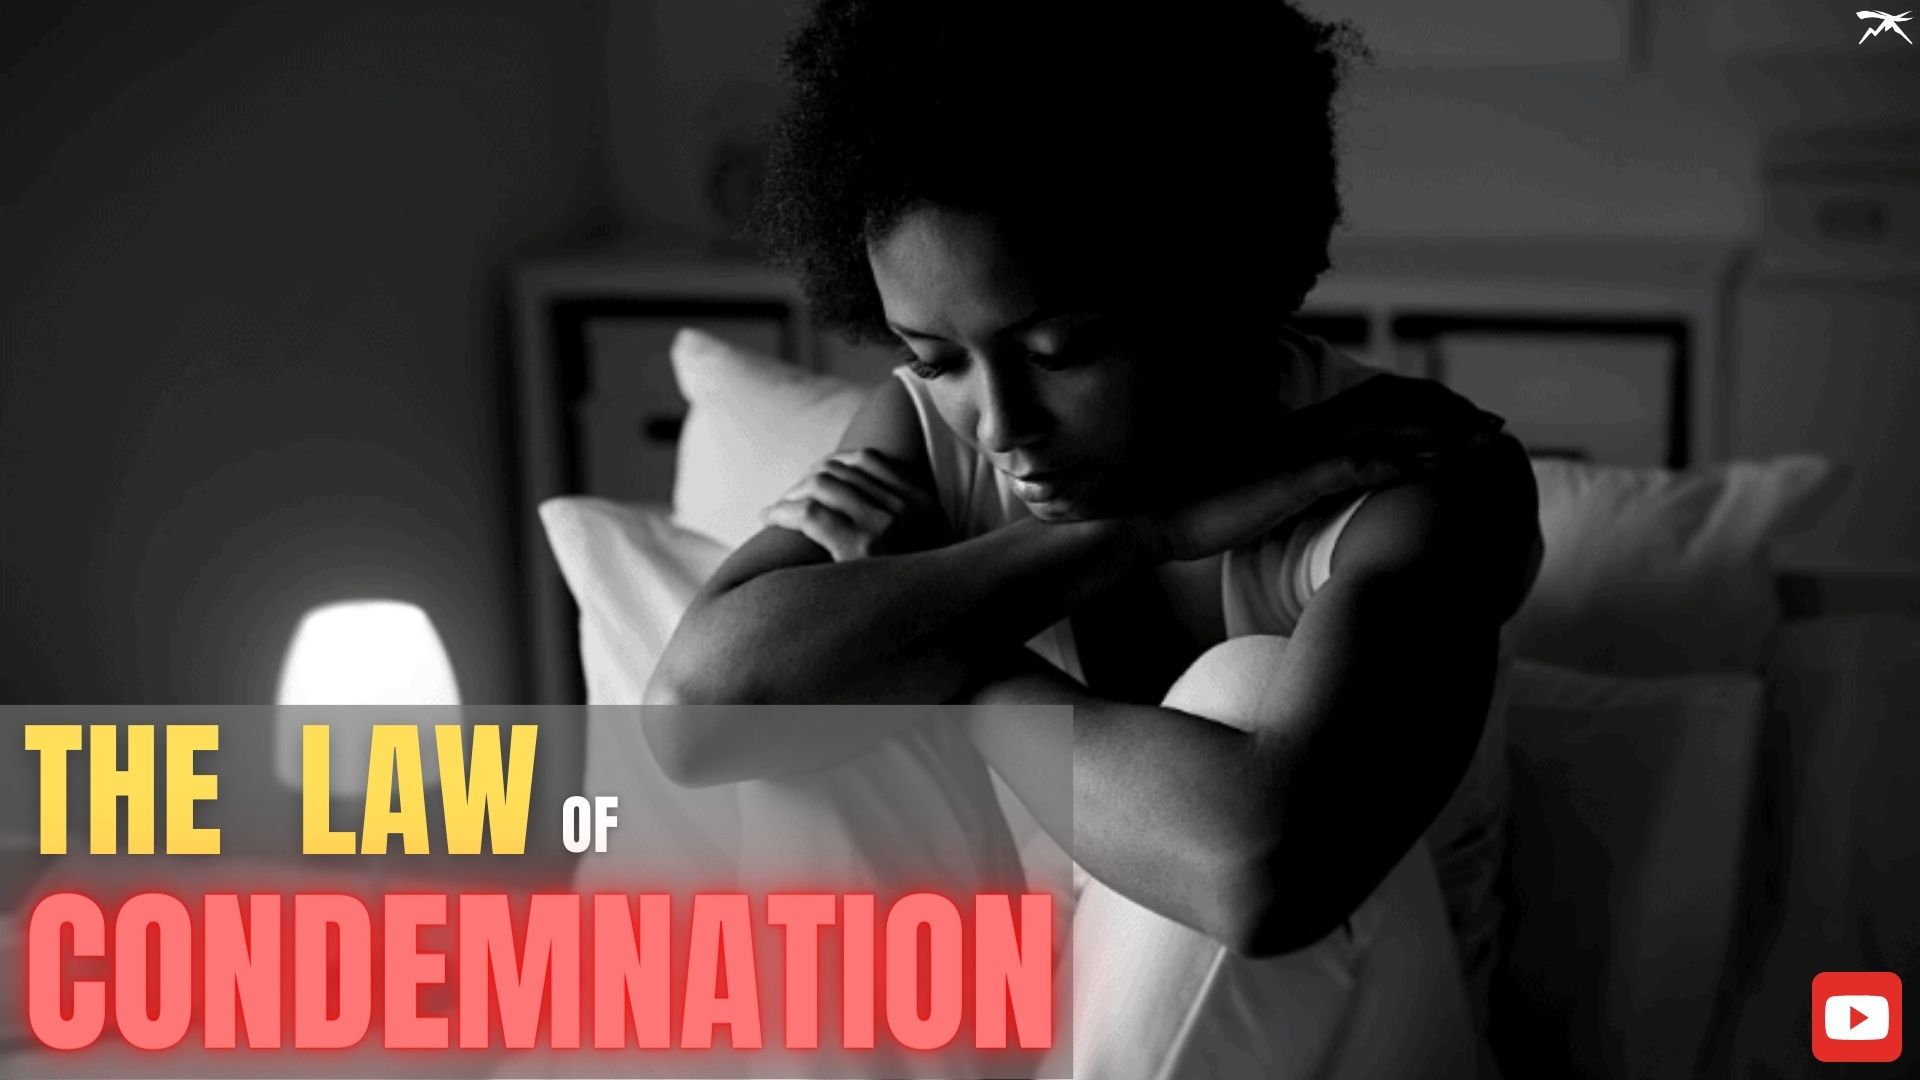  The Law of Condemnation